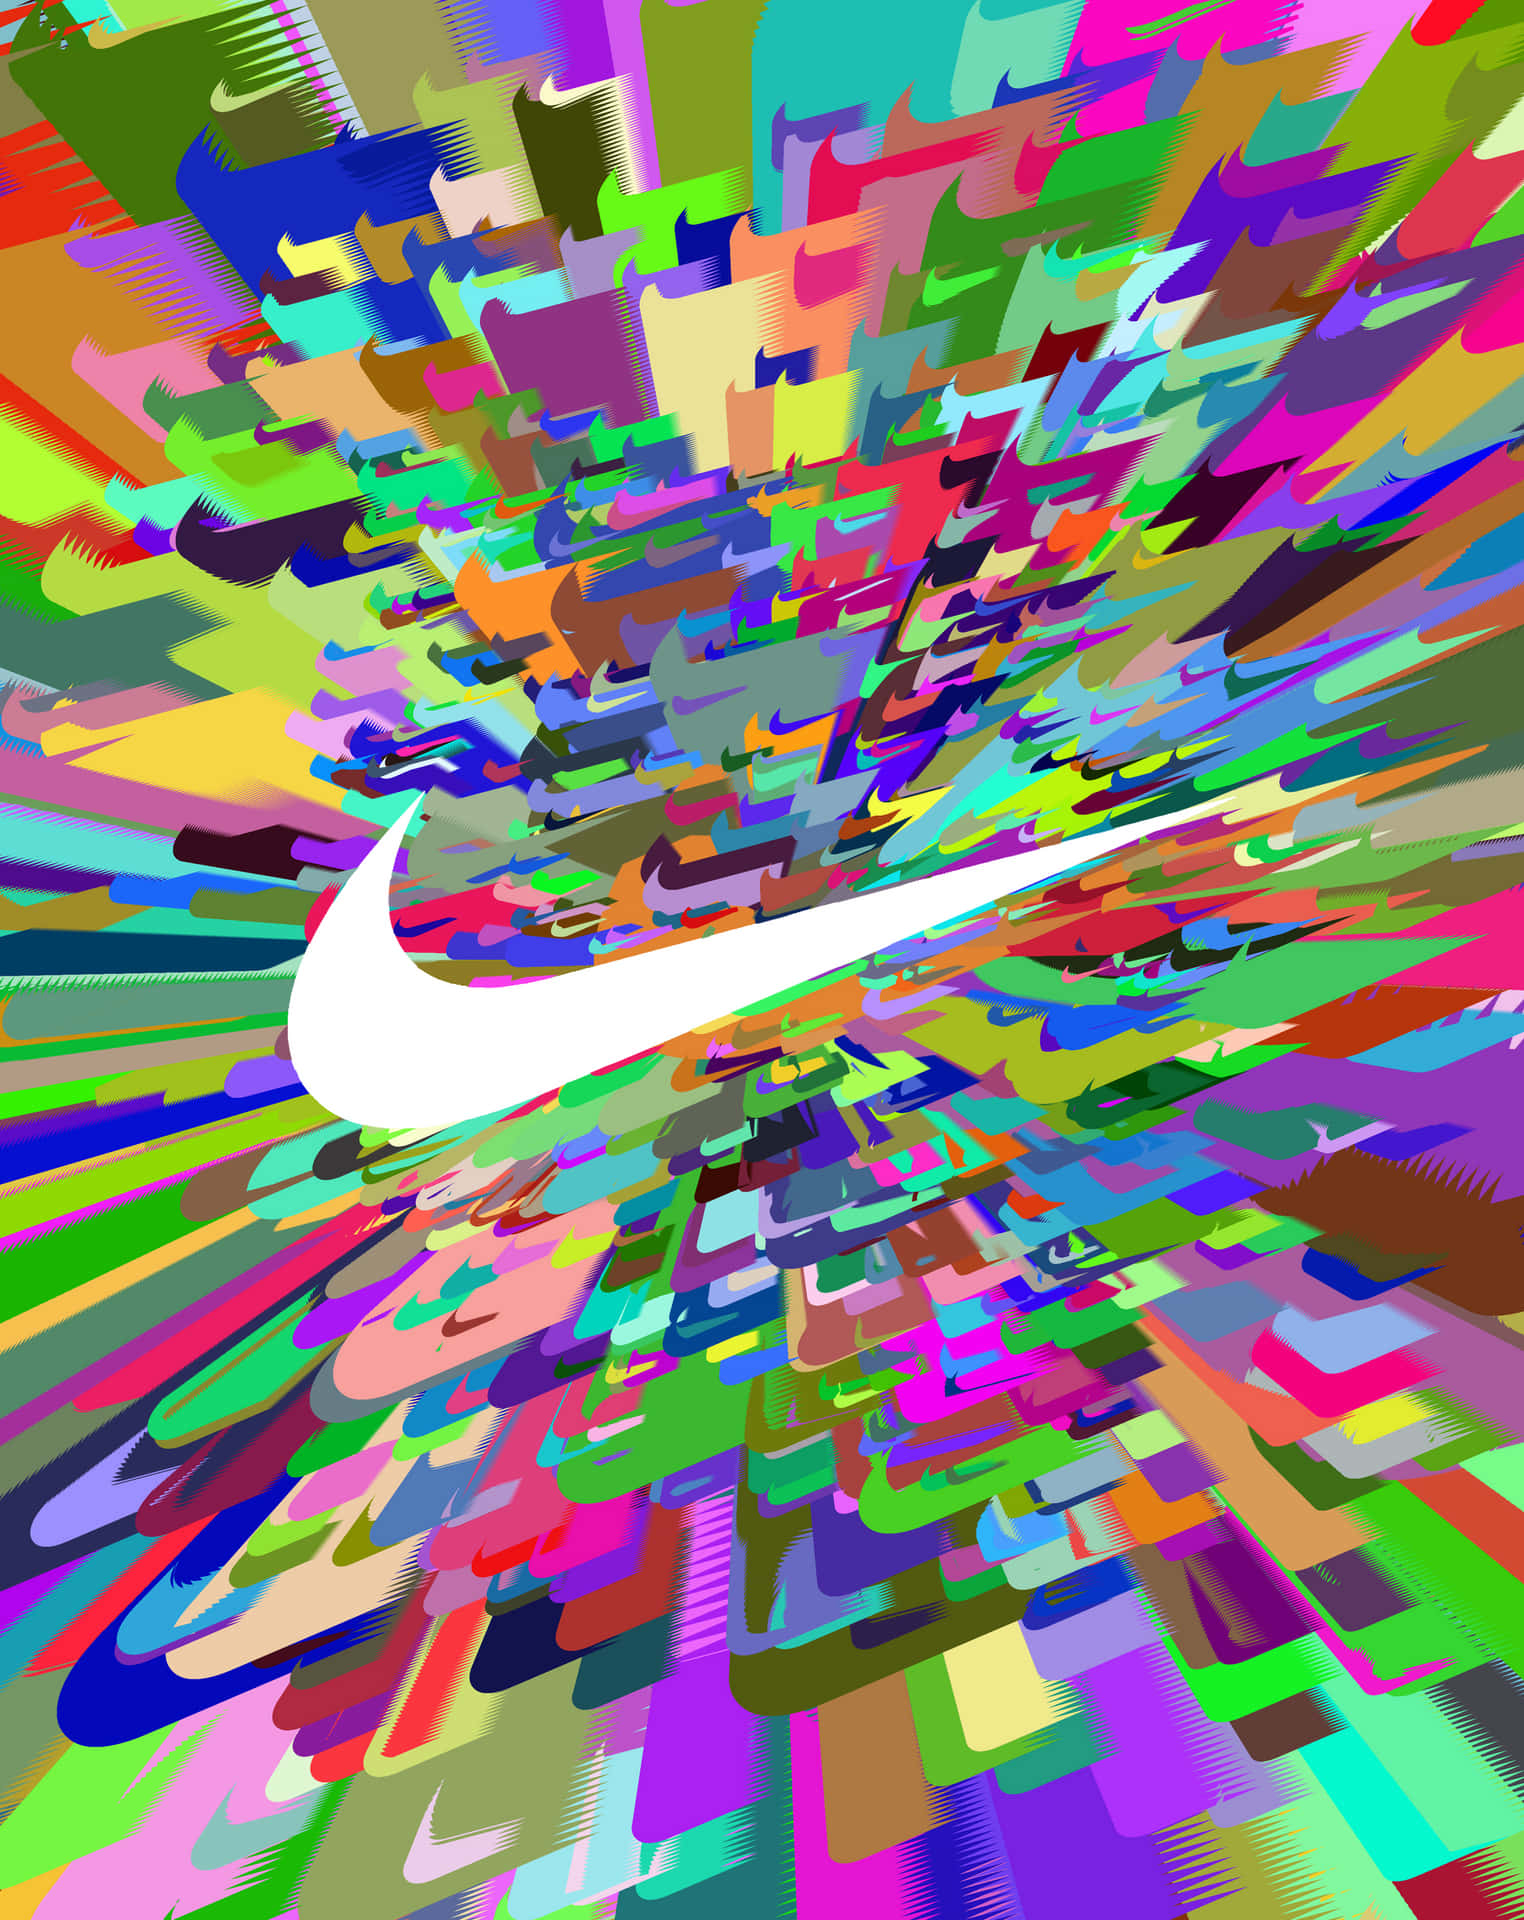 Download Nike Logo In A Colorful Abstract Pattern | Wallpapers.com